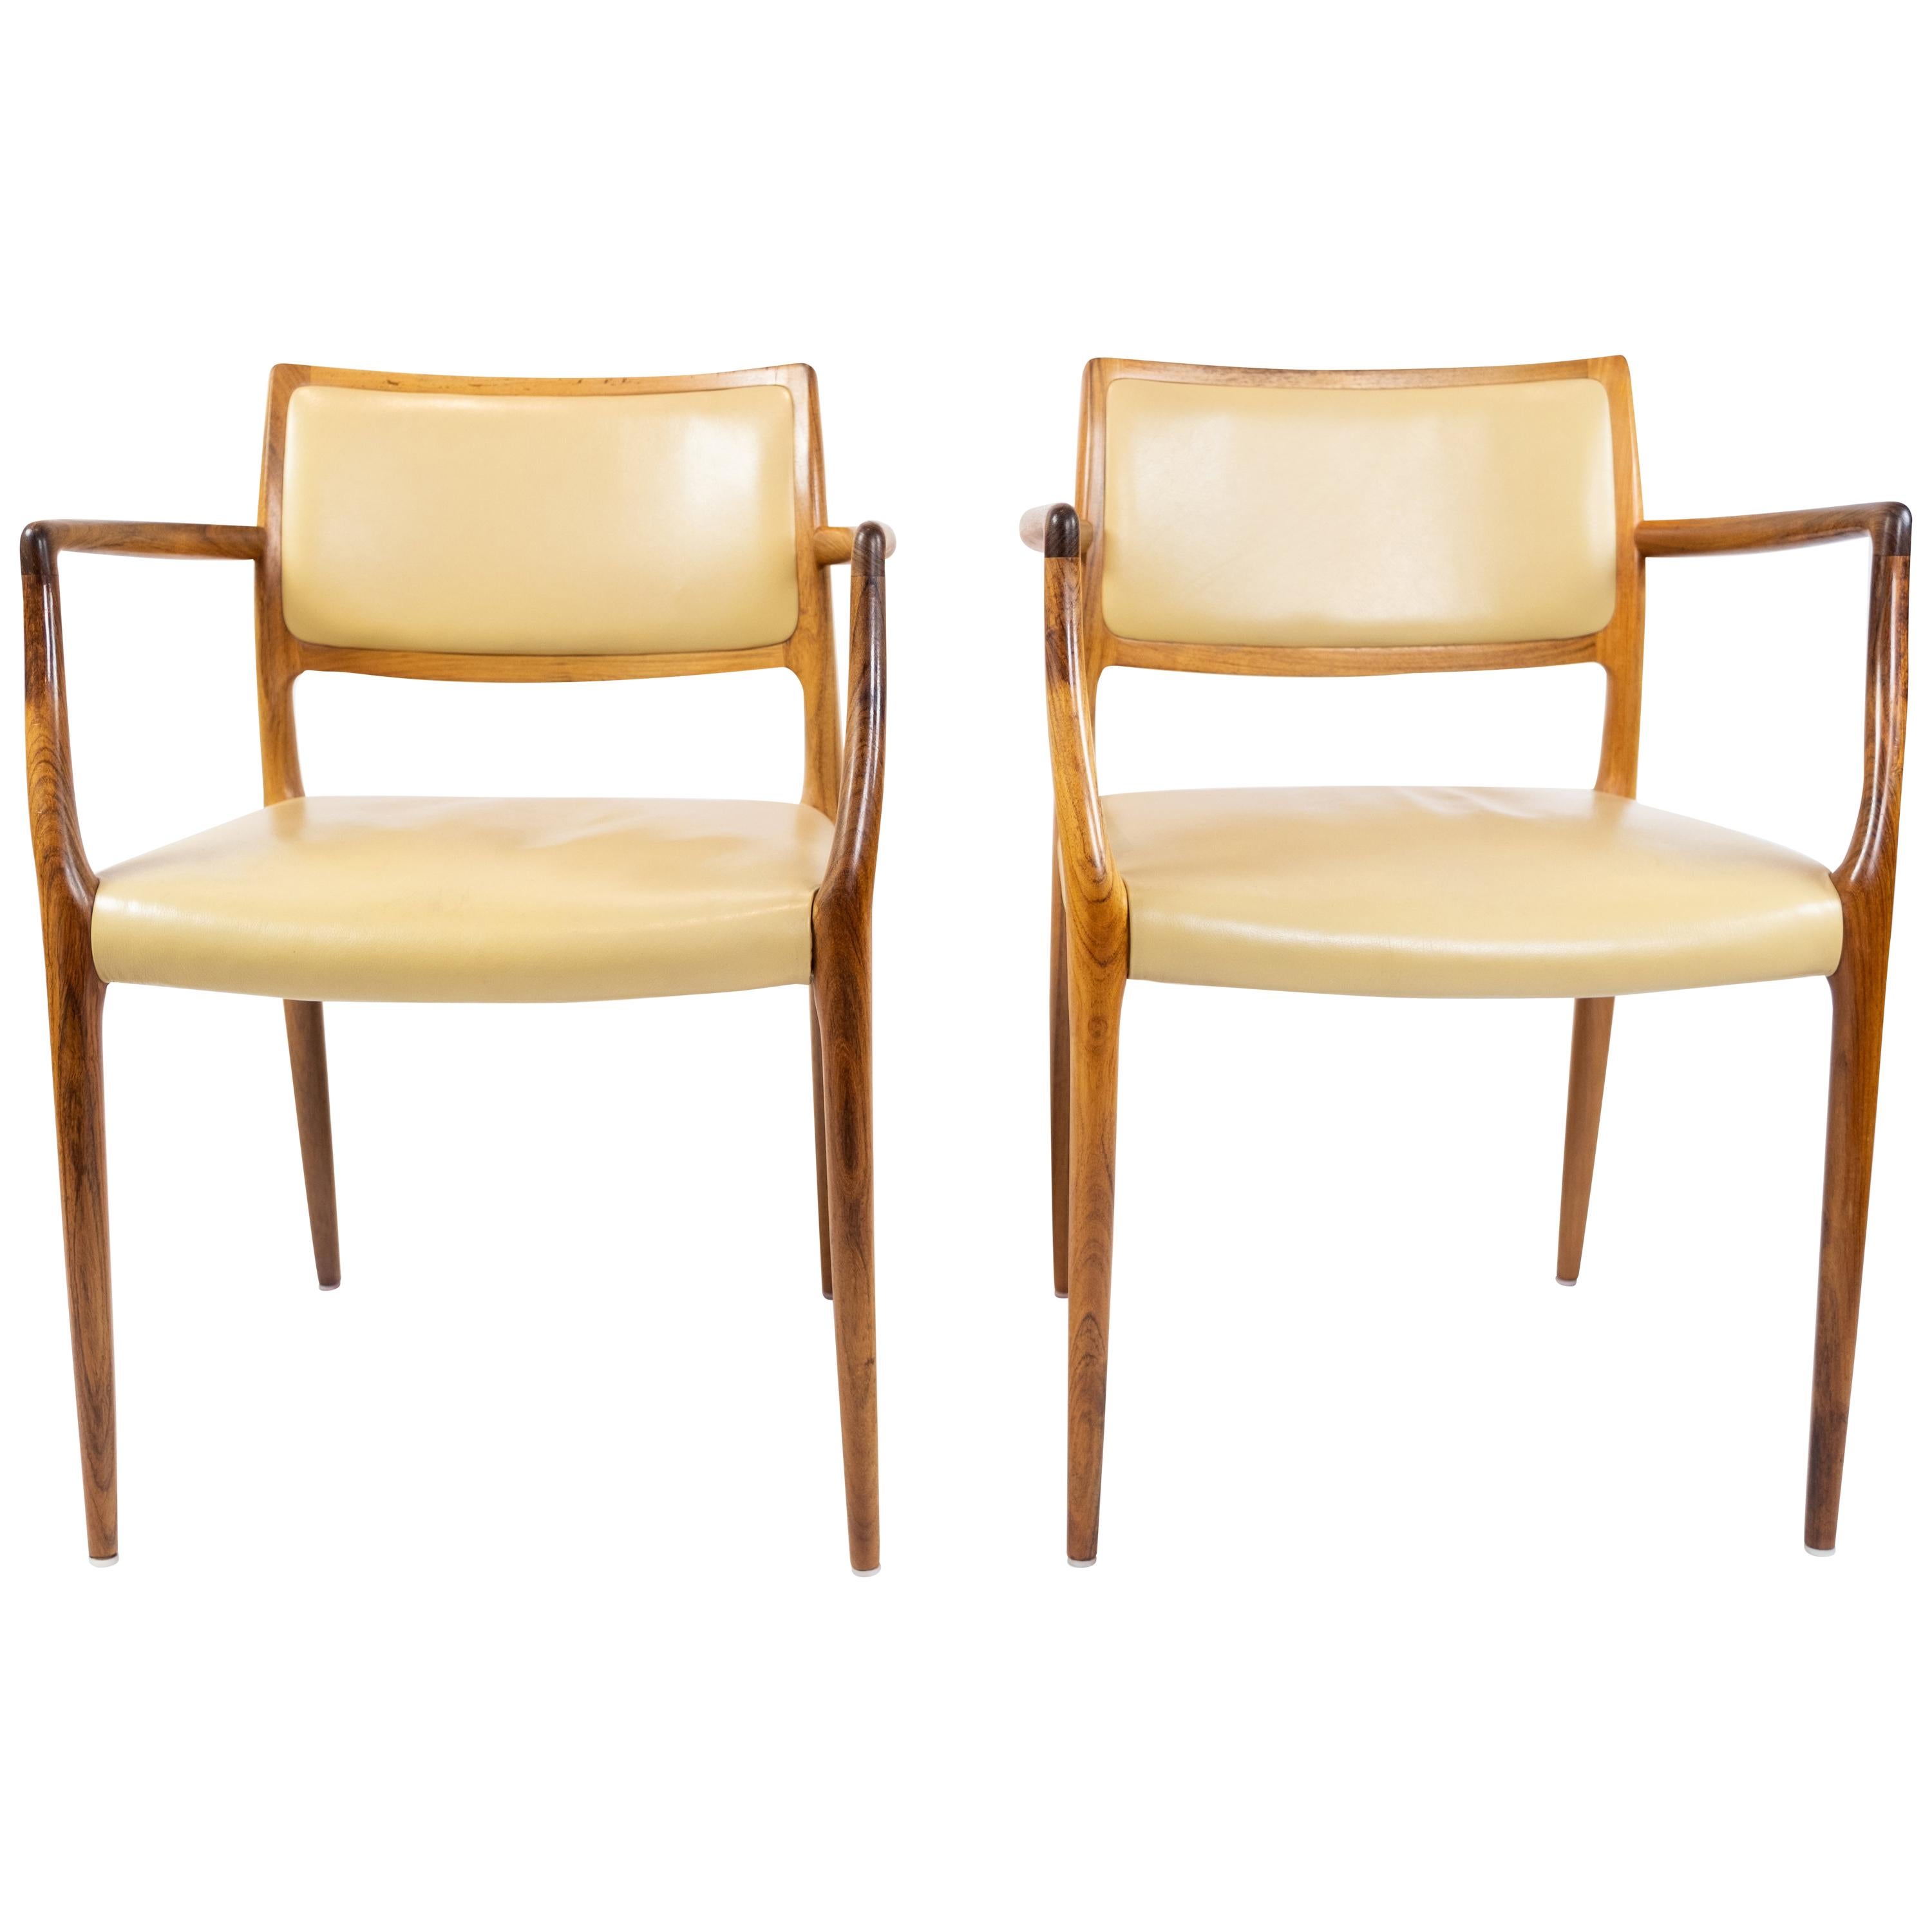 A Pair Of 2 Armchairs Model 65 Made In Rosewood By Niels O. Møller From 1968s